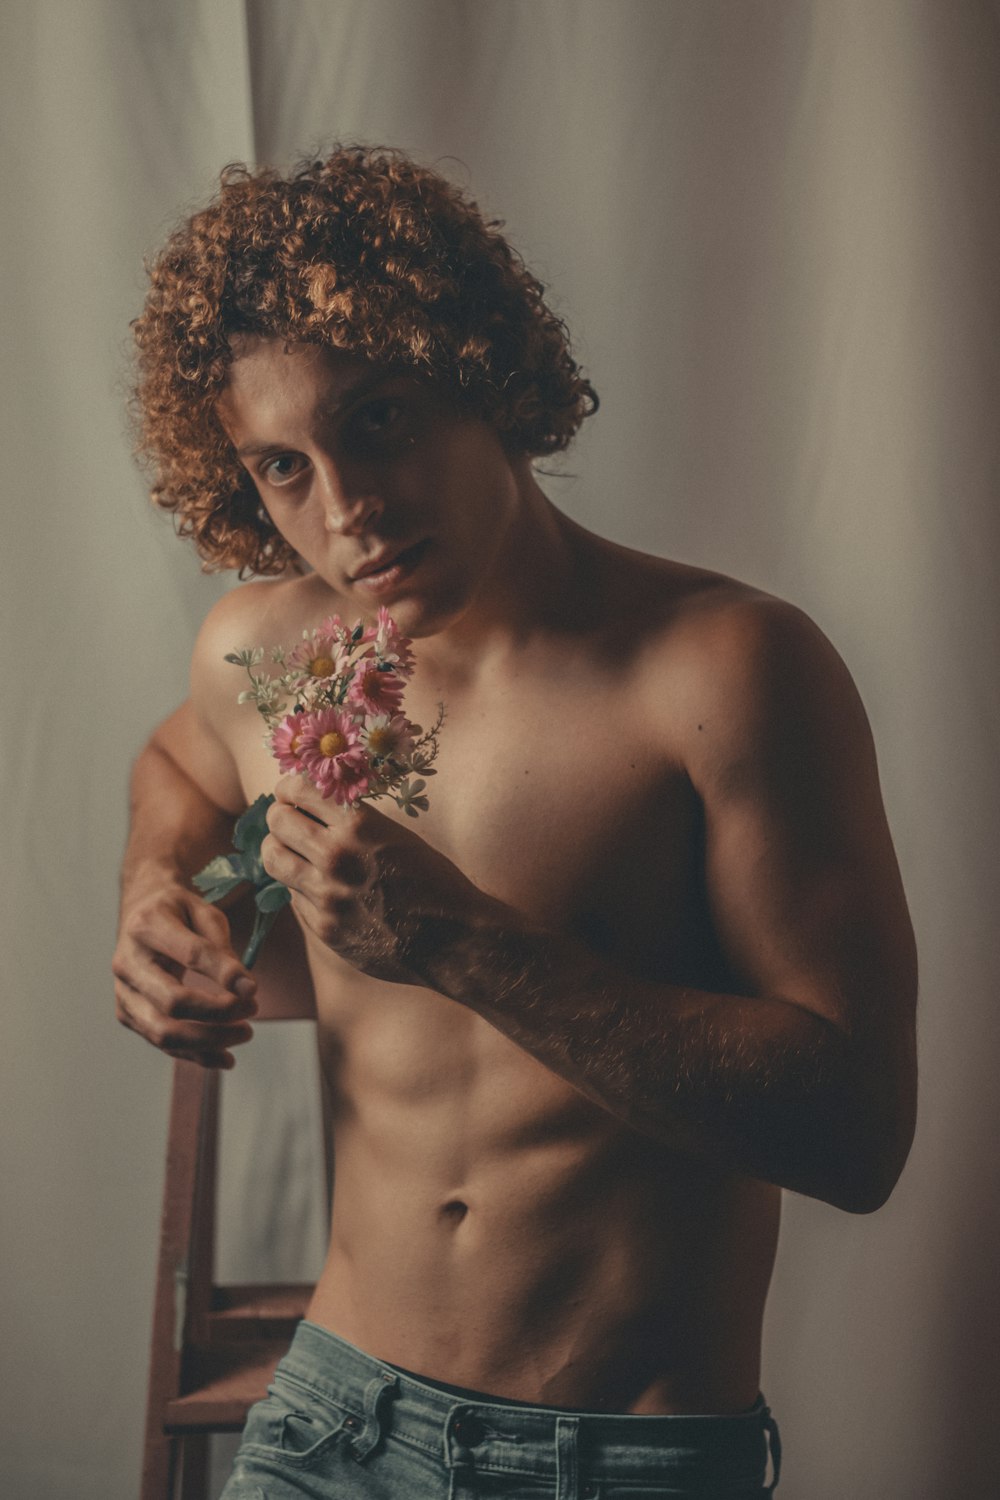 a shirtless man holding a bunch of flowers